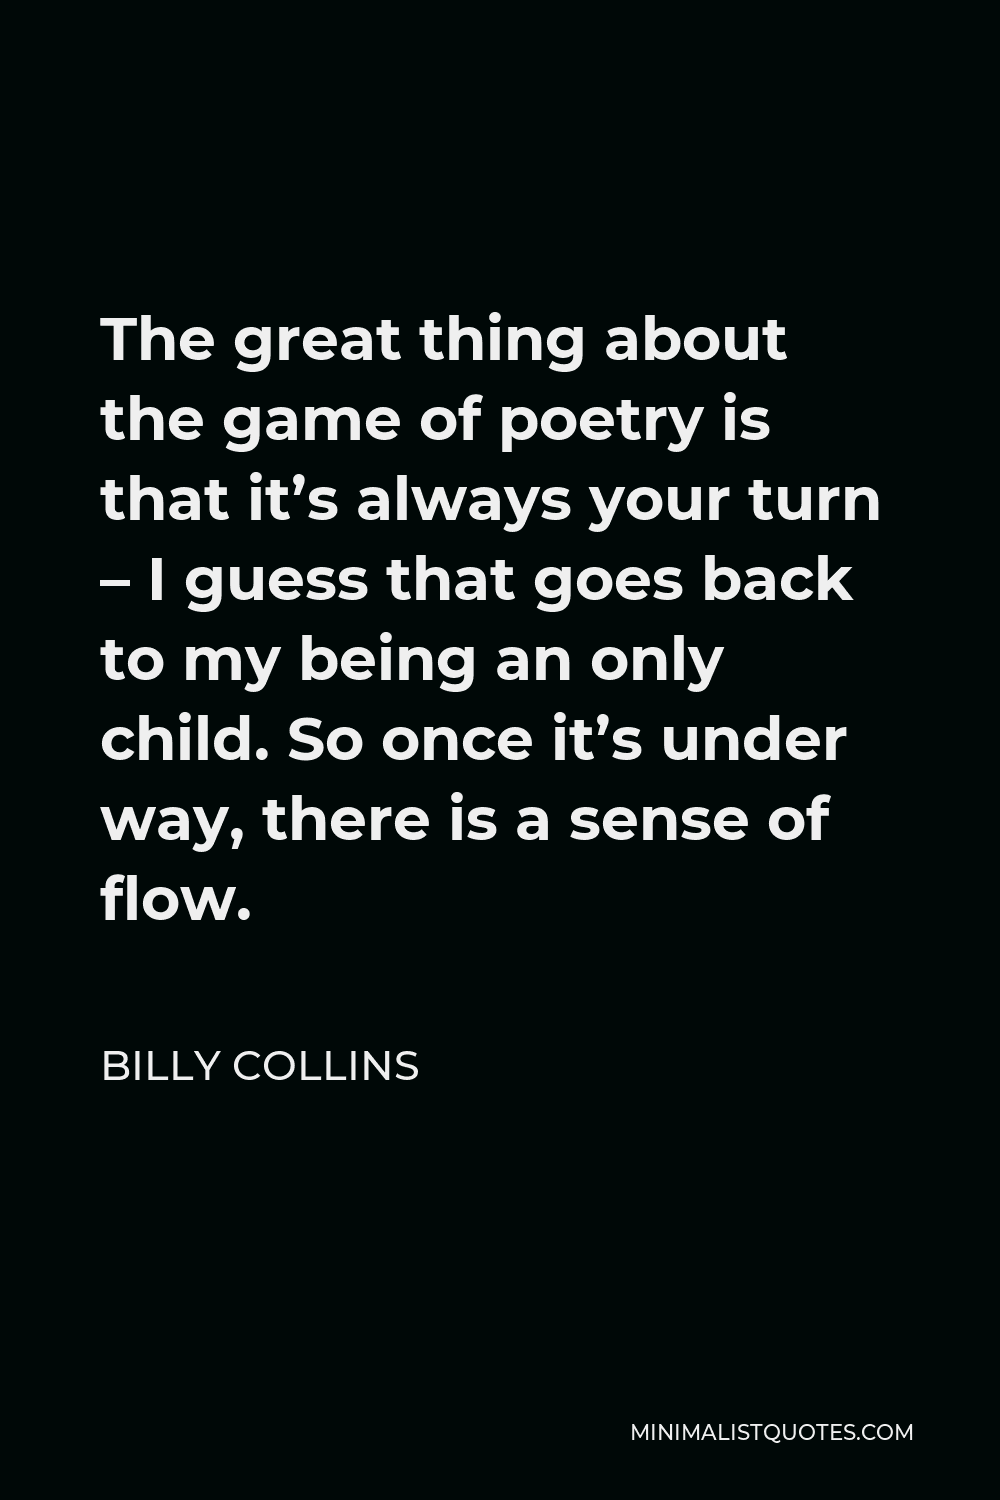 Billy Collins Quote - The great thing about the game of poetry is that it’s always your turn – I guess that goes back to my being an only child. So once it’s under way, there is a sense of flow.